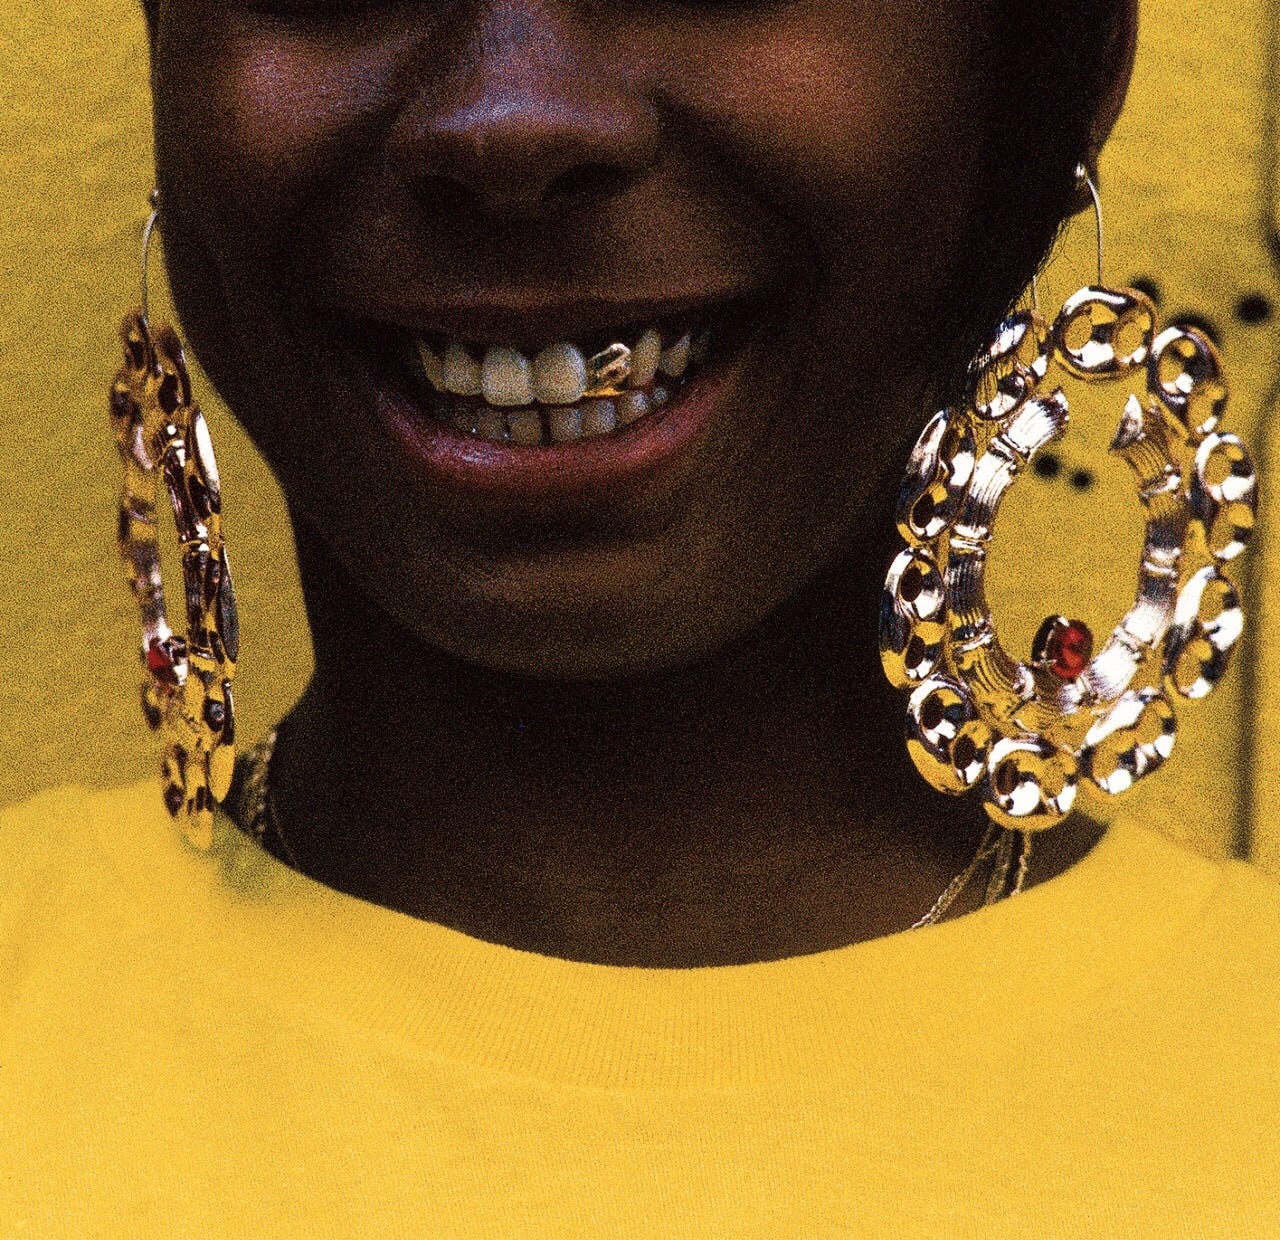 Black Girls From The Hood Are The Real Trendsetters, by Wanna Thompson